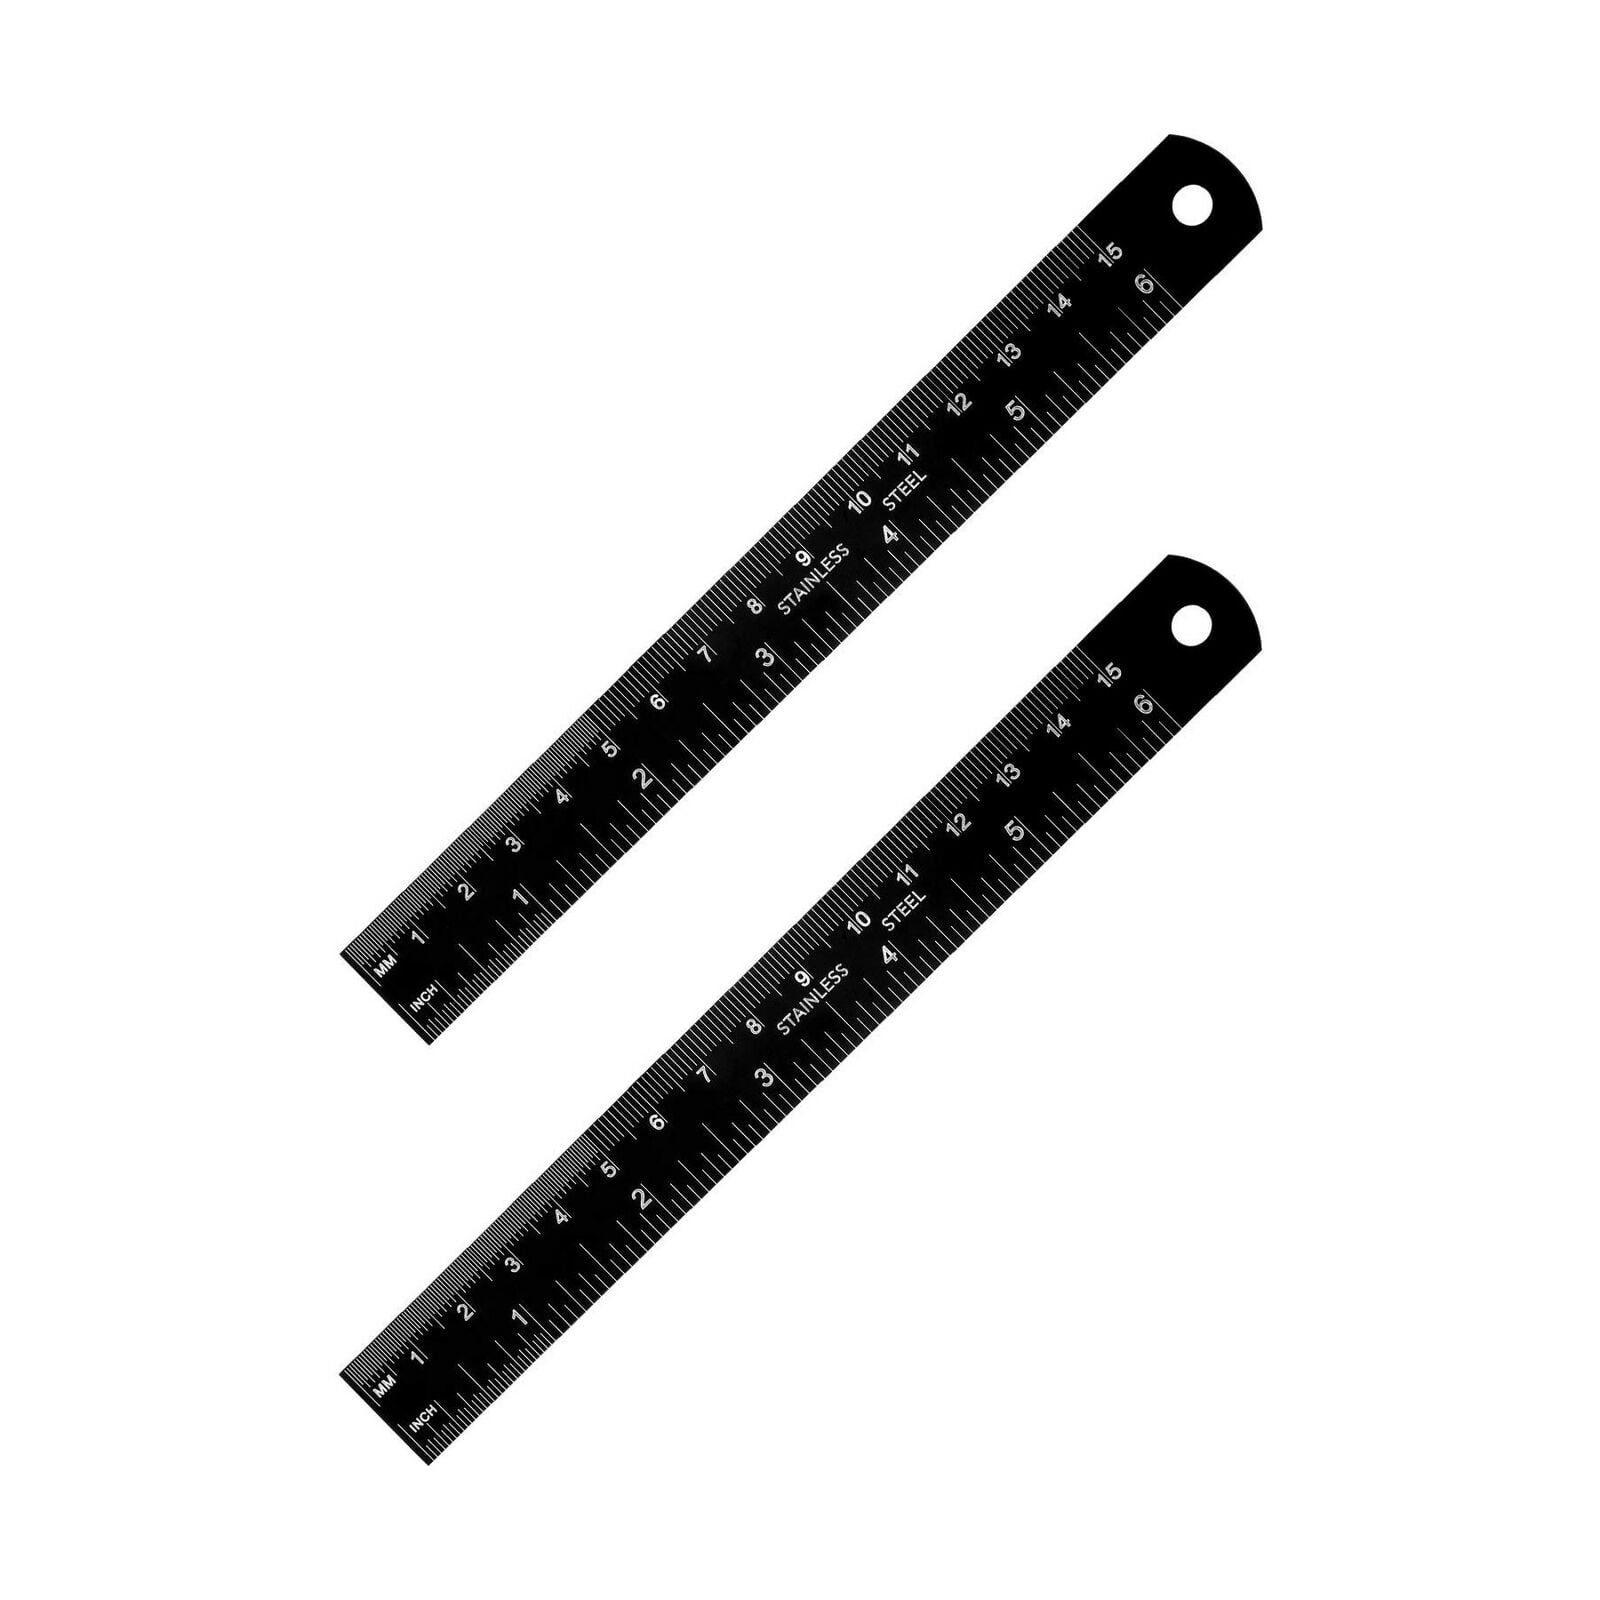 eBoot Stainless Steel Ruler 12 Inch and 6 Inch Metal Rule Kit with Conversion 